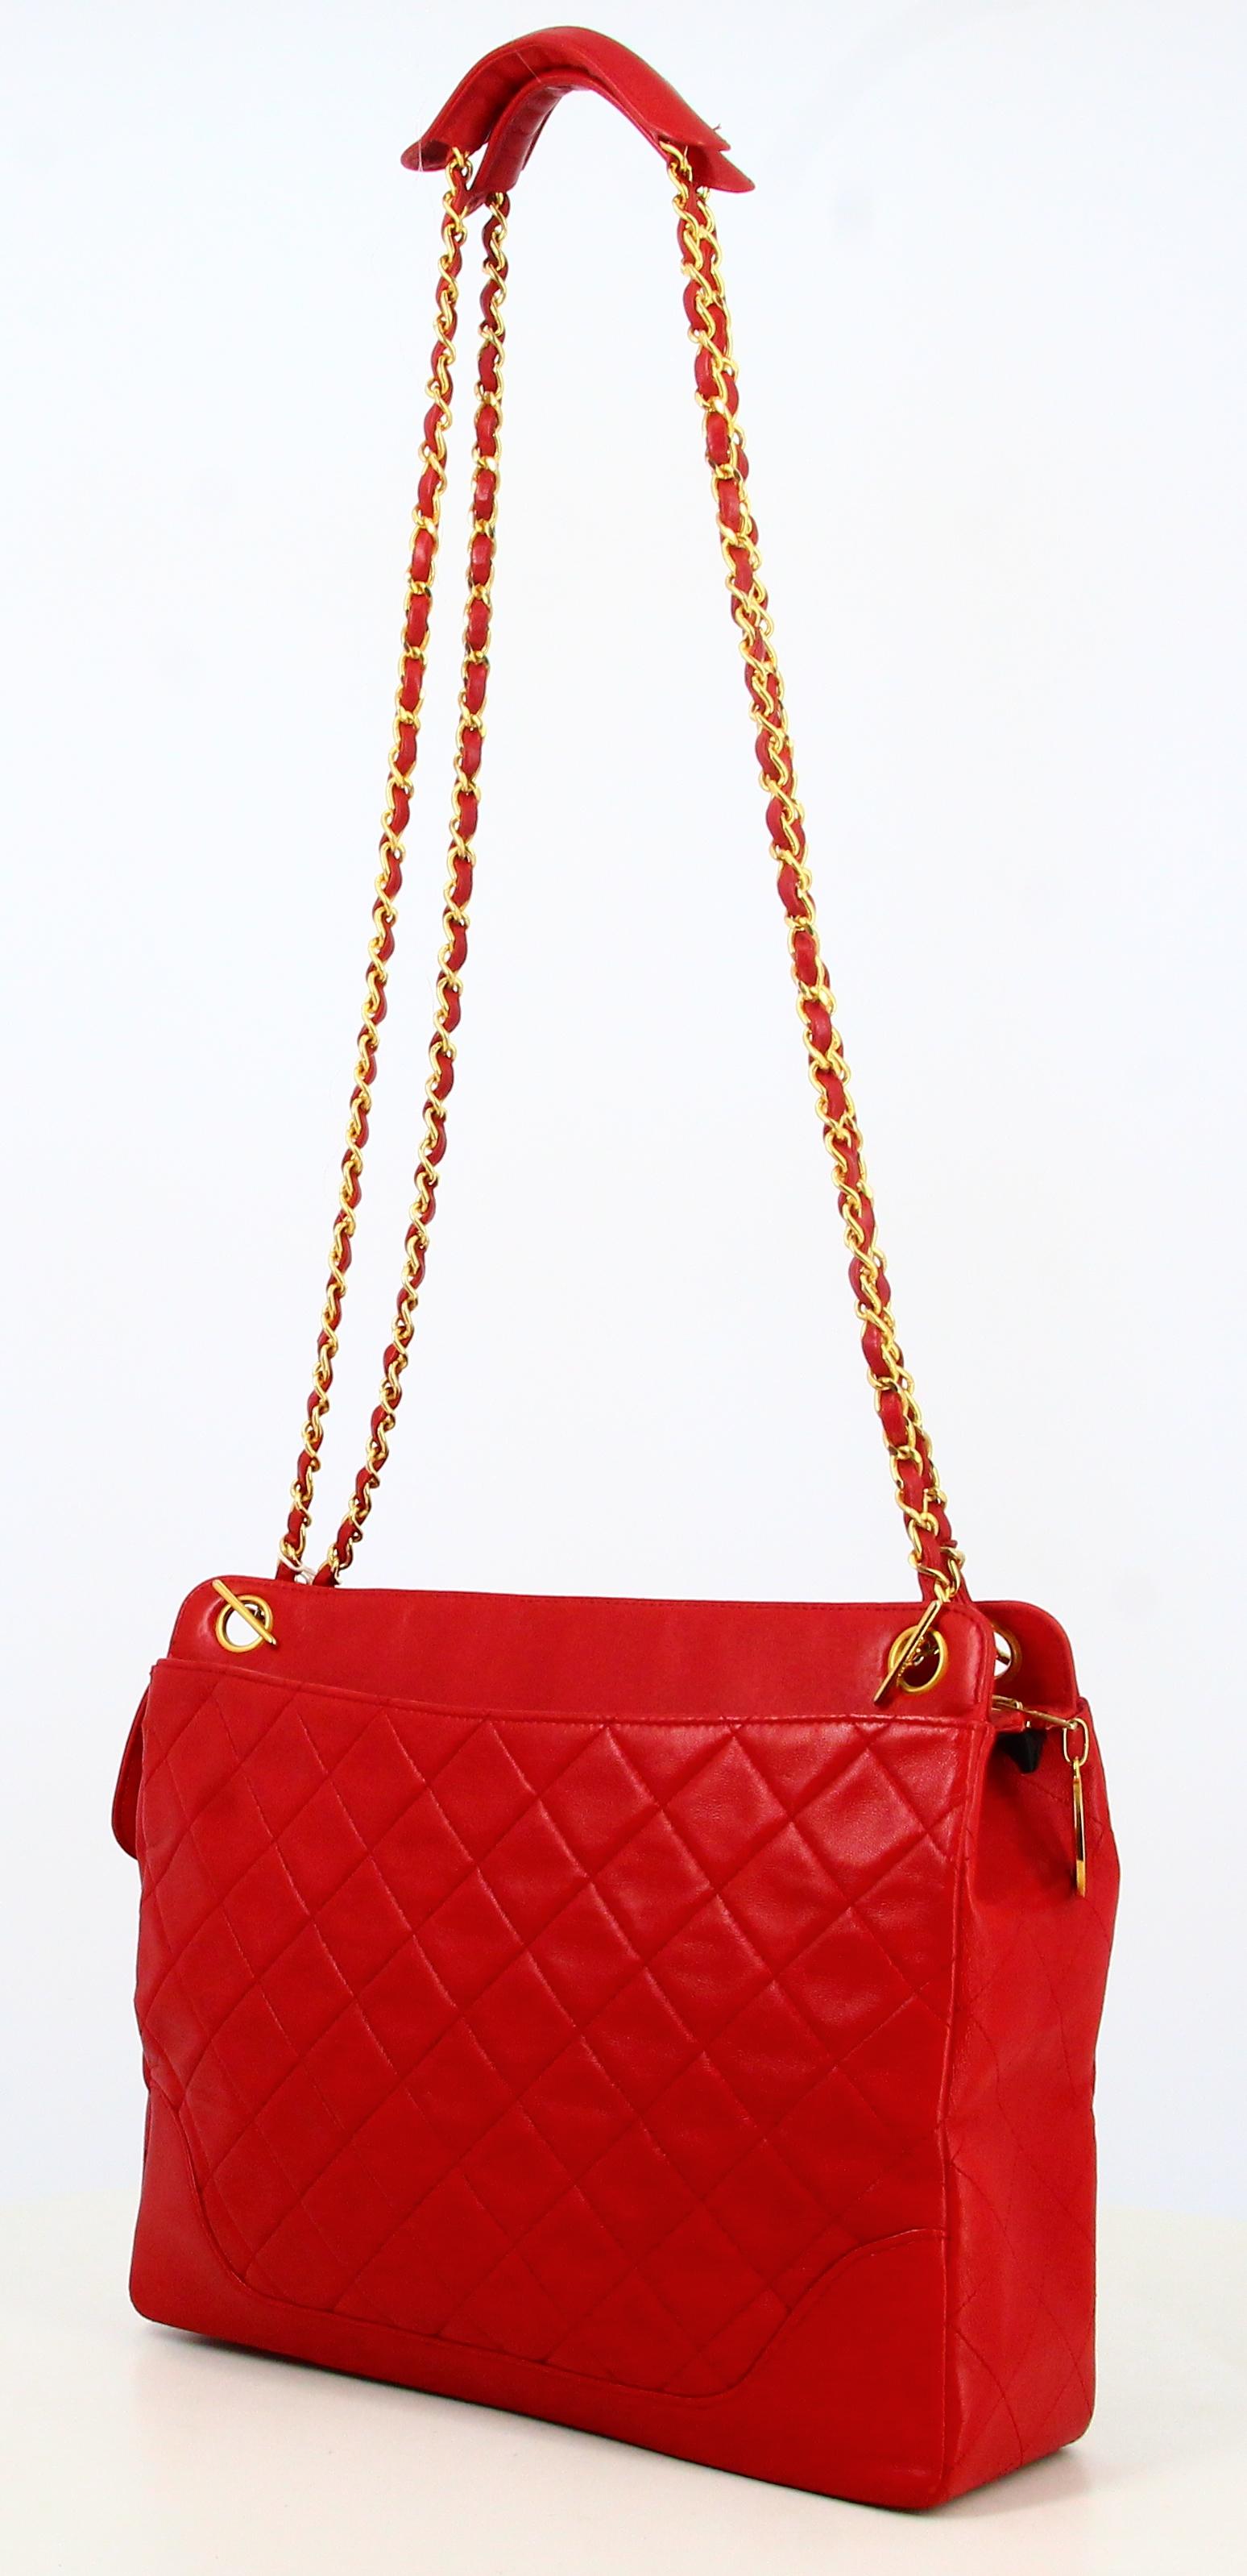 1989 Handbag Chanel quilted leather Red  1